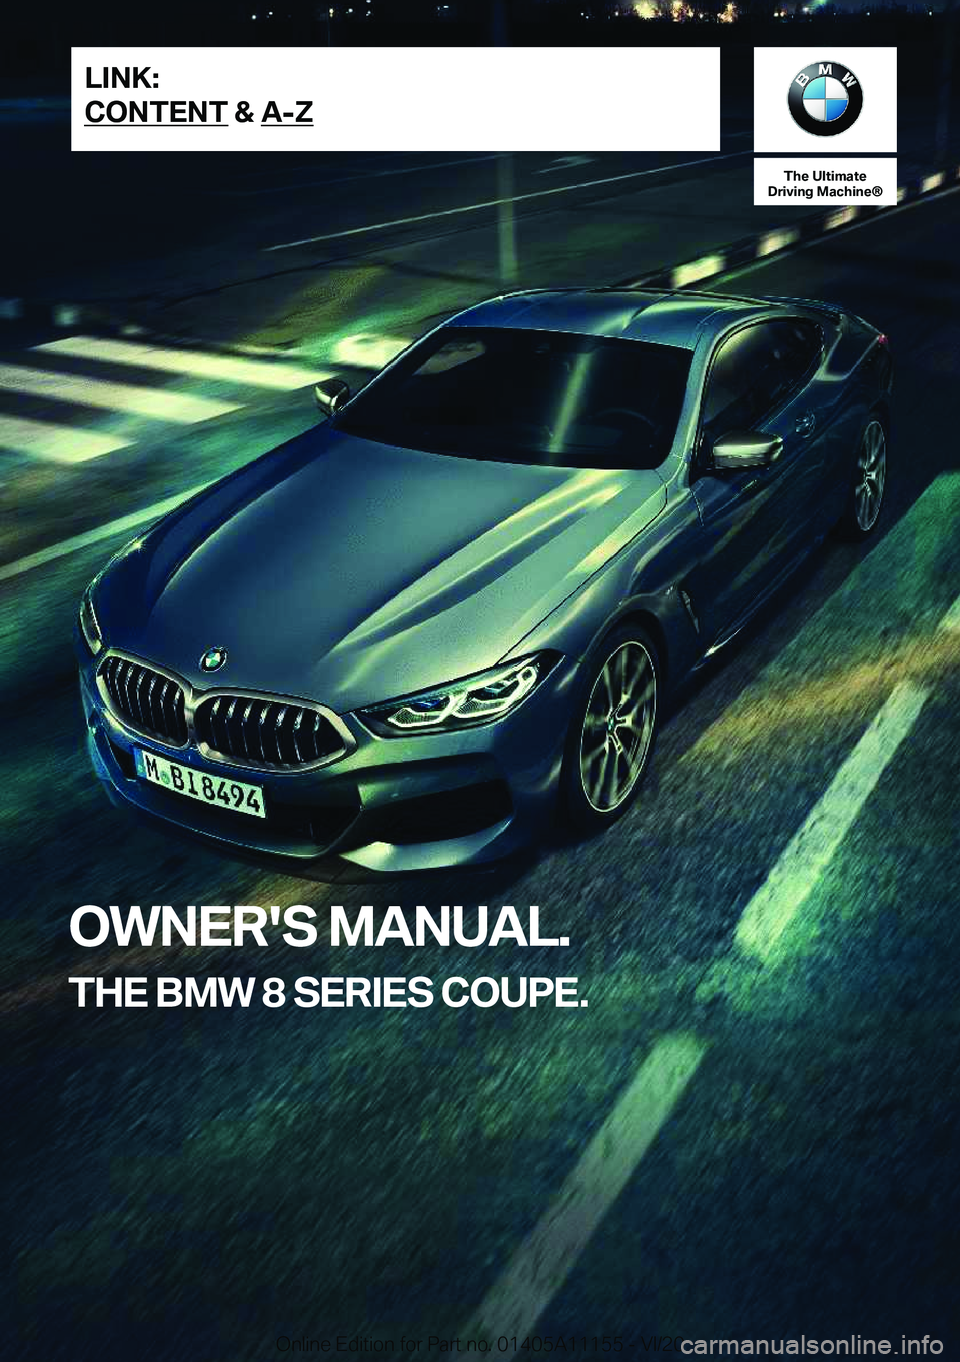 BMW 8 SERIES COUPE 2021  Owners Manual �T�h�e��U�l�t�i�m�a�t�e
�D�r�i�v�i�n�g��M�a�c�h�i�n�e�n
�O�W�N�E�R�'�S��M�A�N�U�A�L�.
�T�H�E��B�M�W��8��S�E�R�I�E�S��C�O�U�P�E�.�L�I�N�K�:
�C�O�N�T�E�N�T��&��A�-�Z�O�n�l�i�n�e��E�d�i�t�i